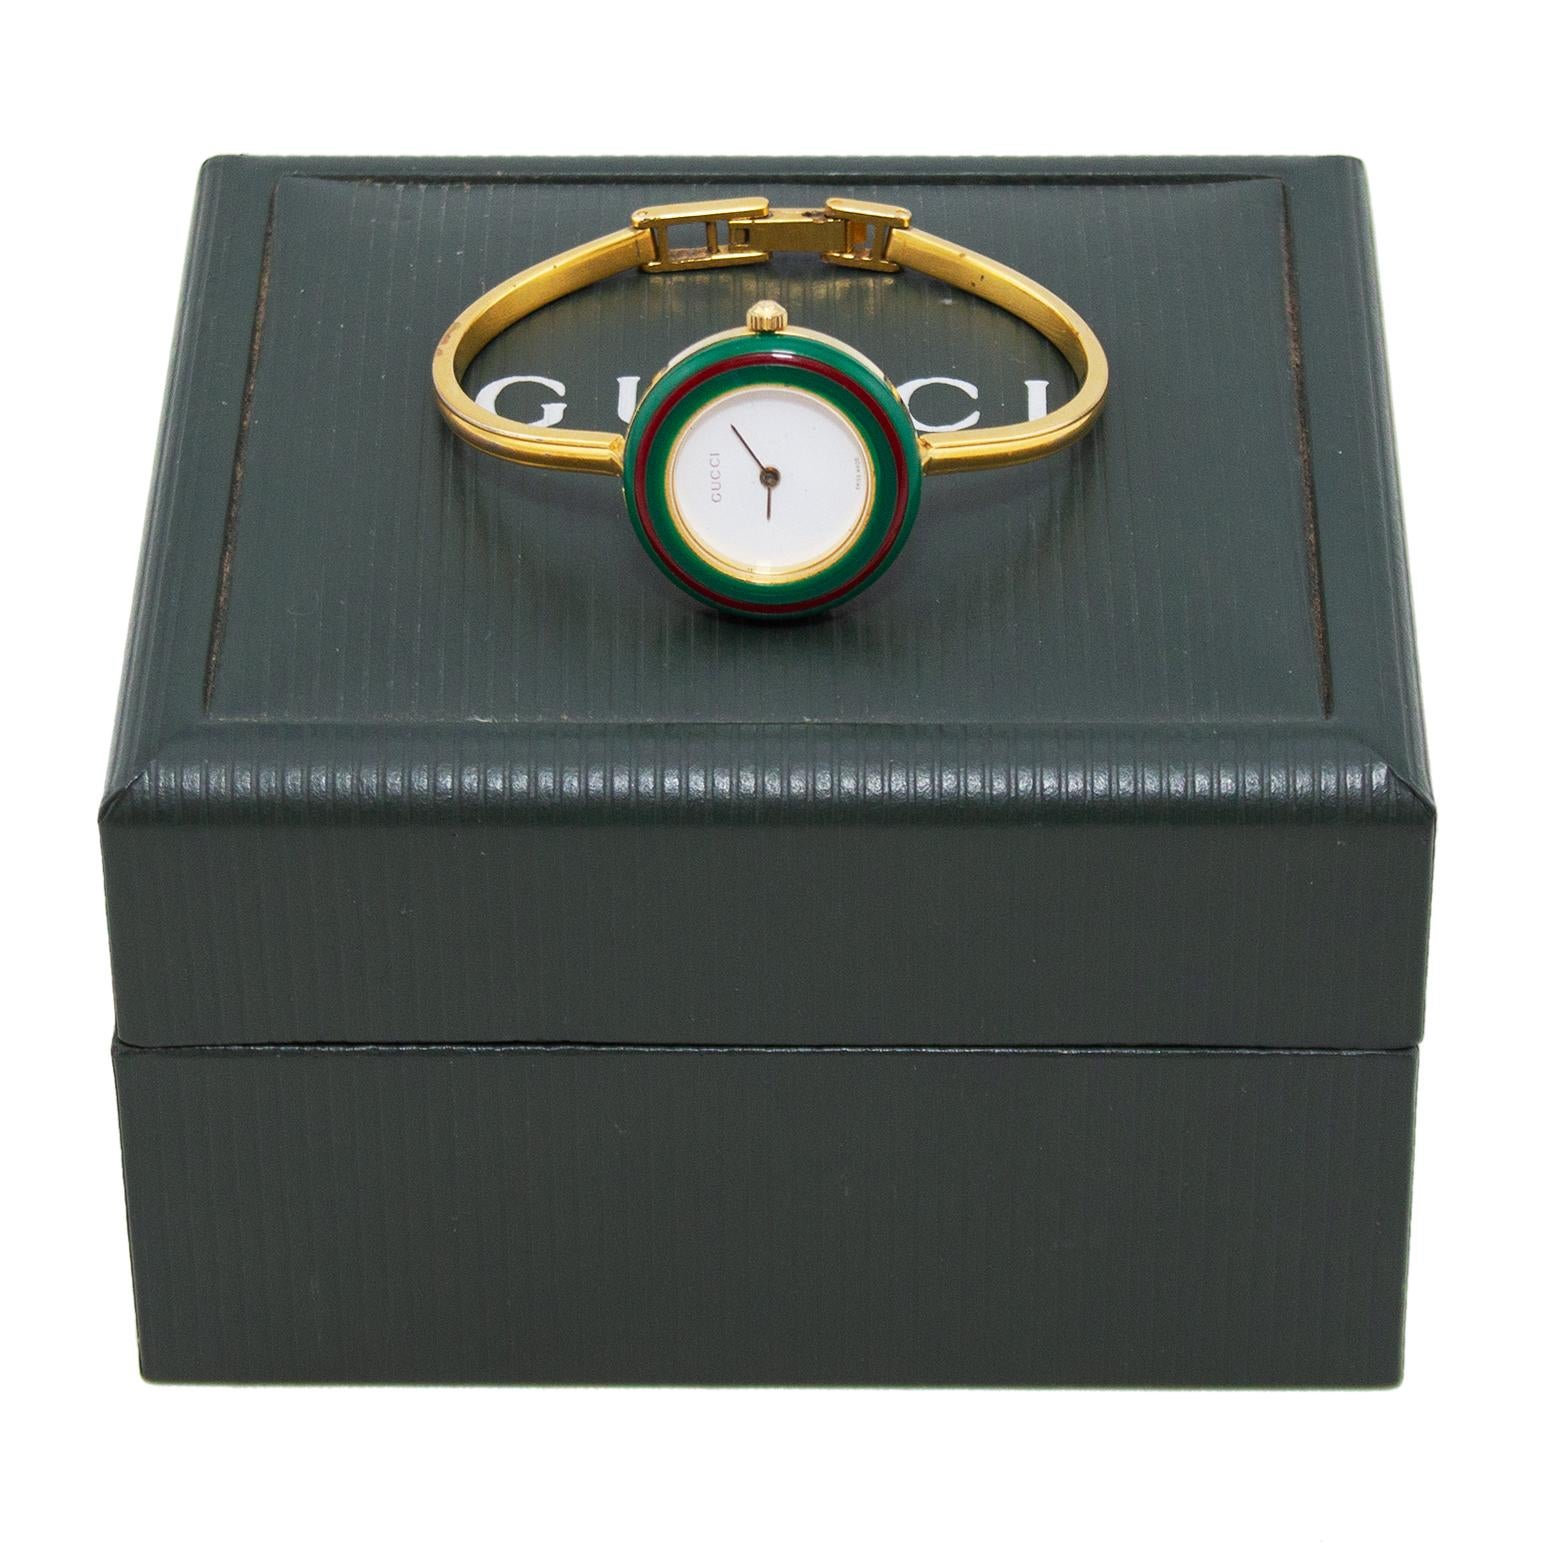 An accessory that goes with every outfit, this Gucci watch from the 1970's has 12 interchangeable colored bezels that screw on to the face. Choose from pastels, basics or the classic Gucci red and green stripe. The body of the watch is goldtone with